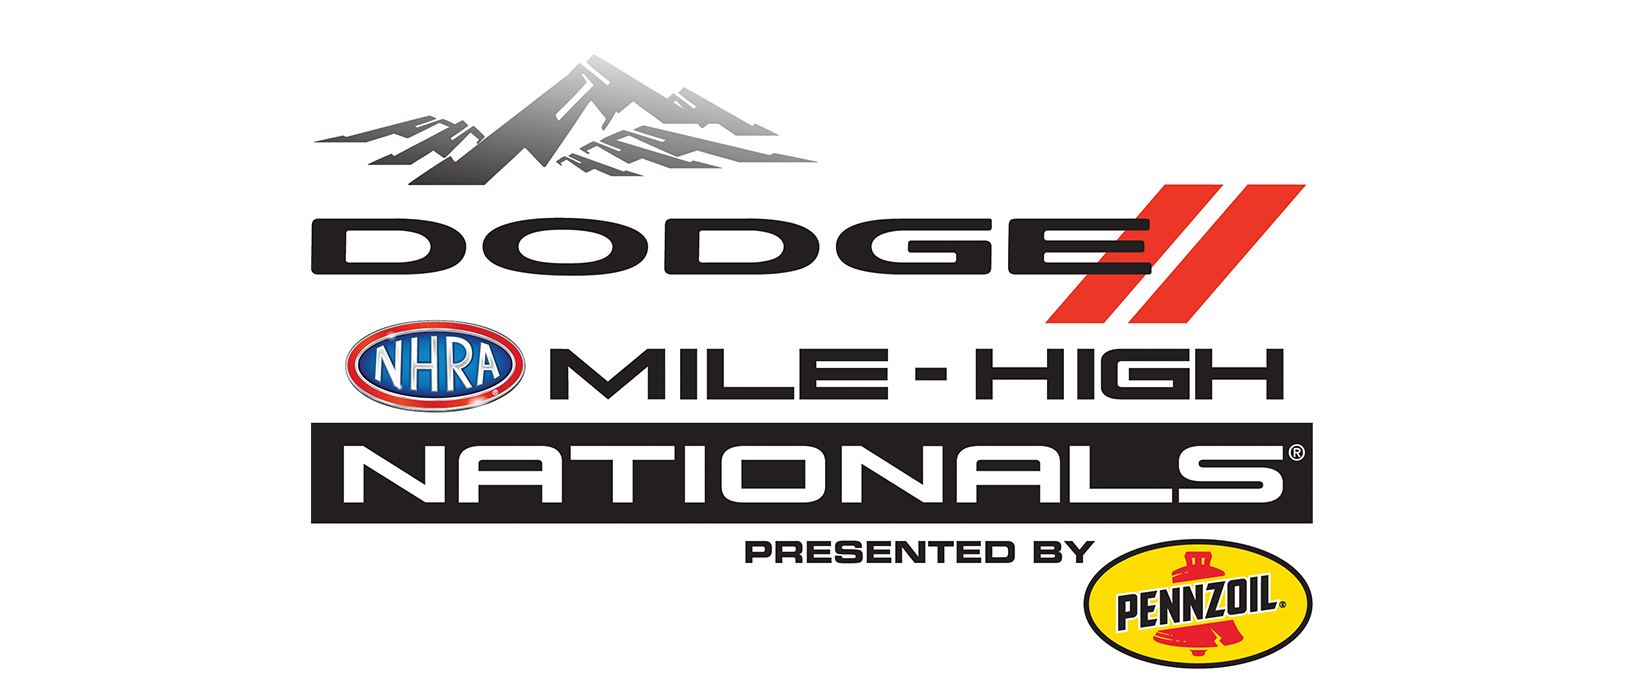 Dodge Mile-High NHRA Nationals Presented by Pennzoil Thunders into Denver, Extends Longest Running Sponsorship in Series